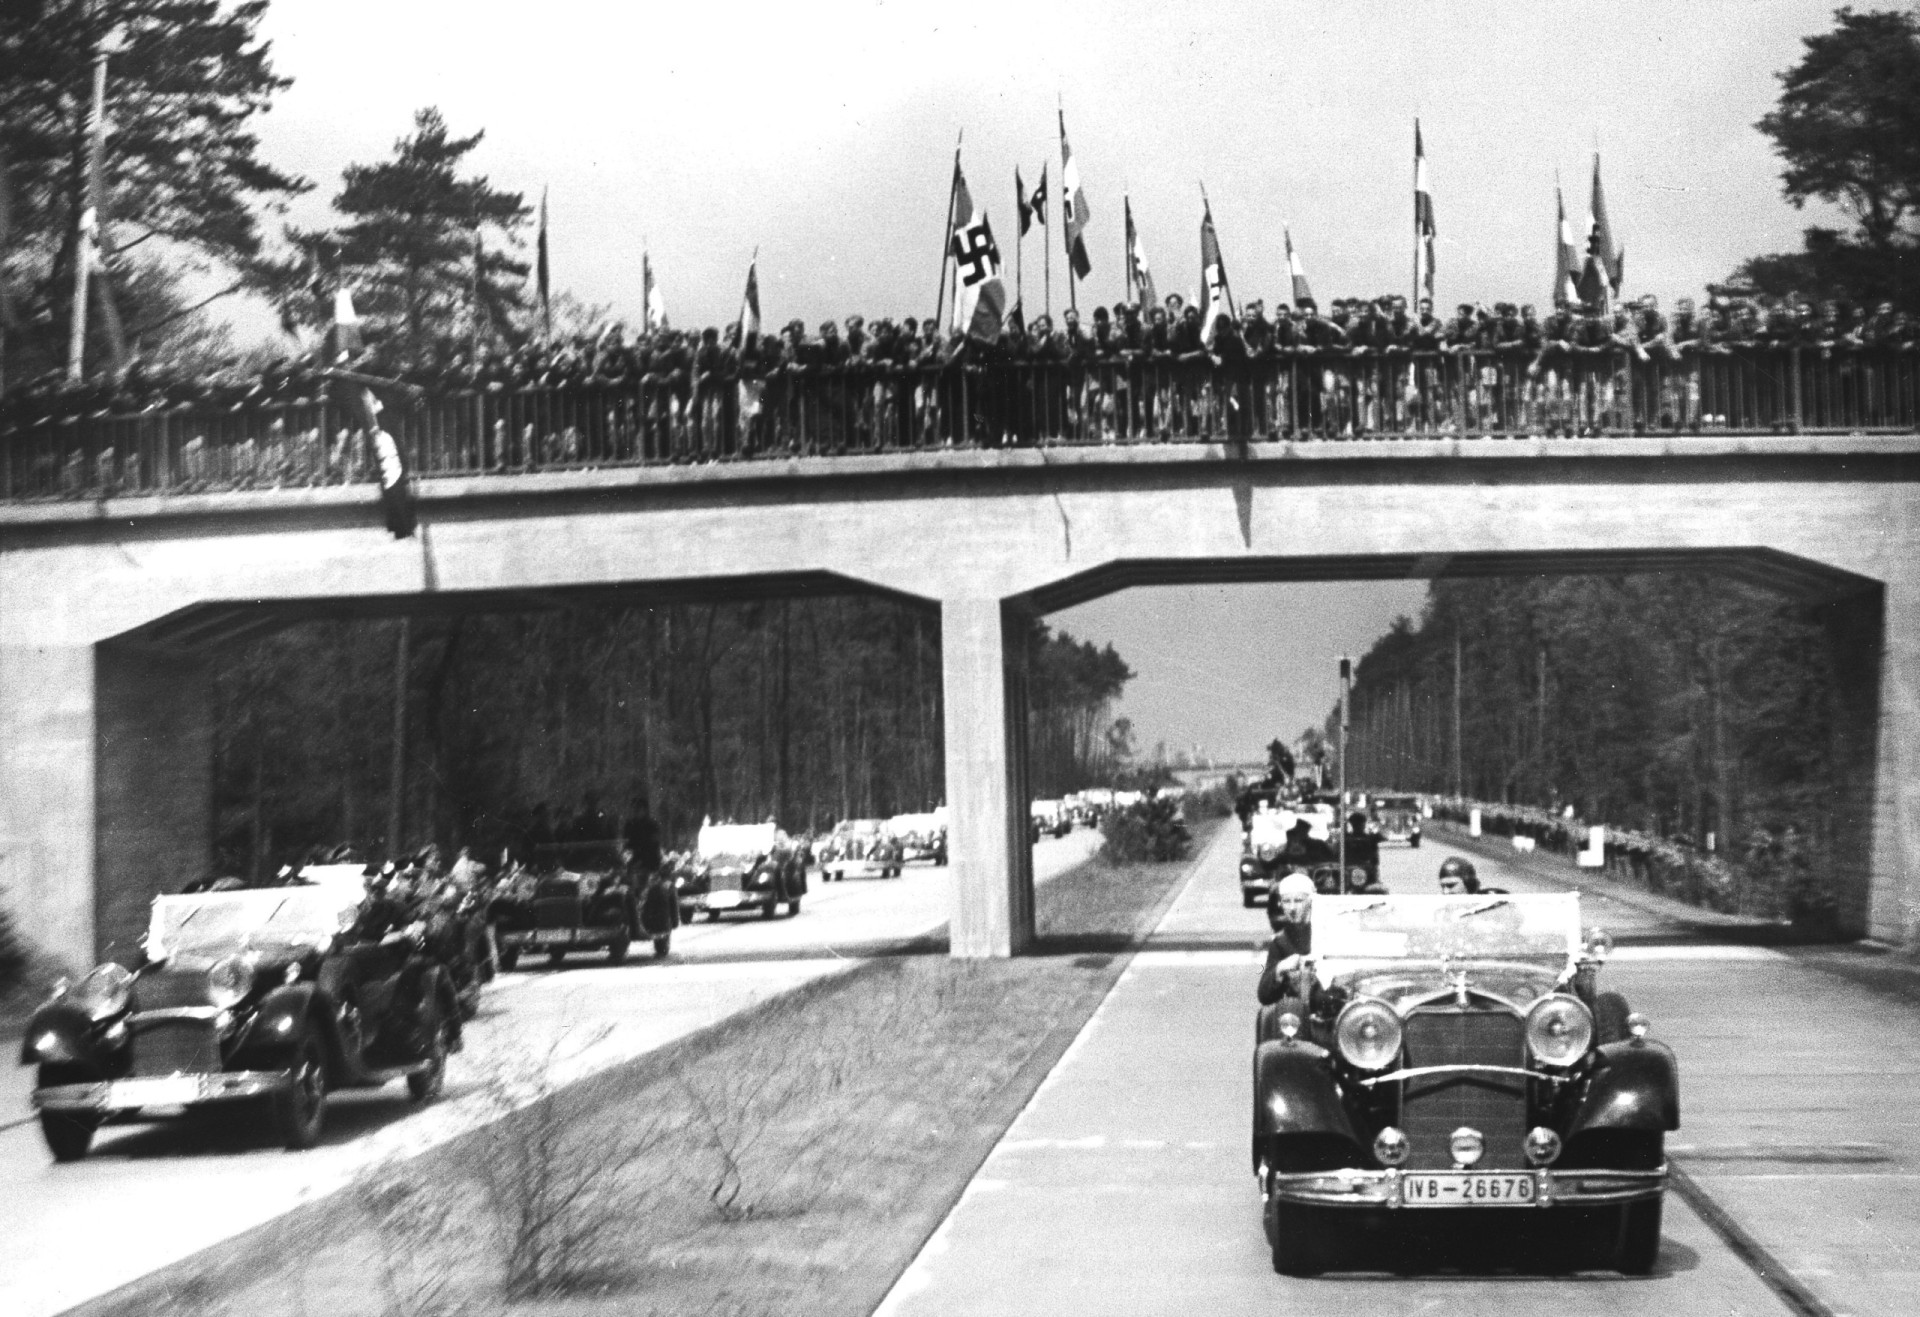 <p>This photograph taken in 1935 shows the opening of the first section of the Frankfurt–Heidelberg motorway near Darmstadt.</p><p><a href="https://www.msn.com/en-us/community/channel/vid-7xx8mnucu55yw63we9va2gwr7uihbxwc68fxqp25x6tg4ftibpra?cvid=94631541bc0f4f89bfd59158d696ad7e">Follow us and access great exclusive content every day</a></p>